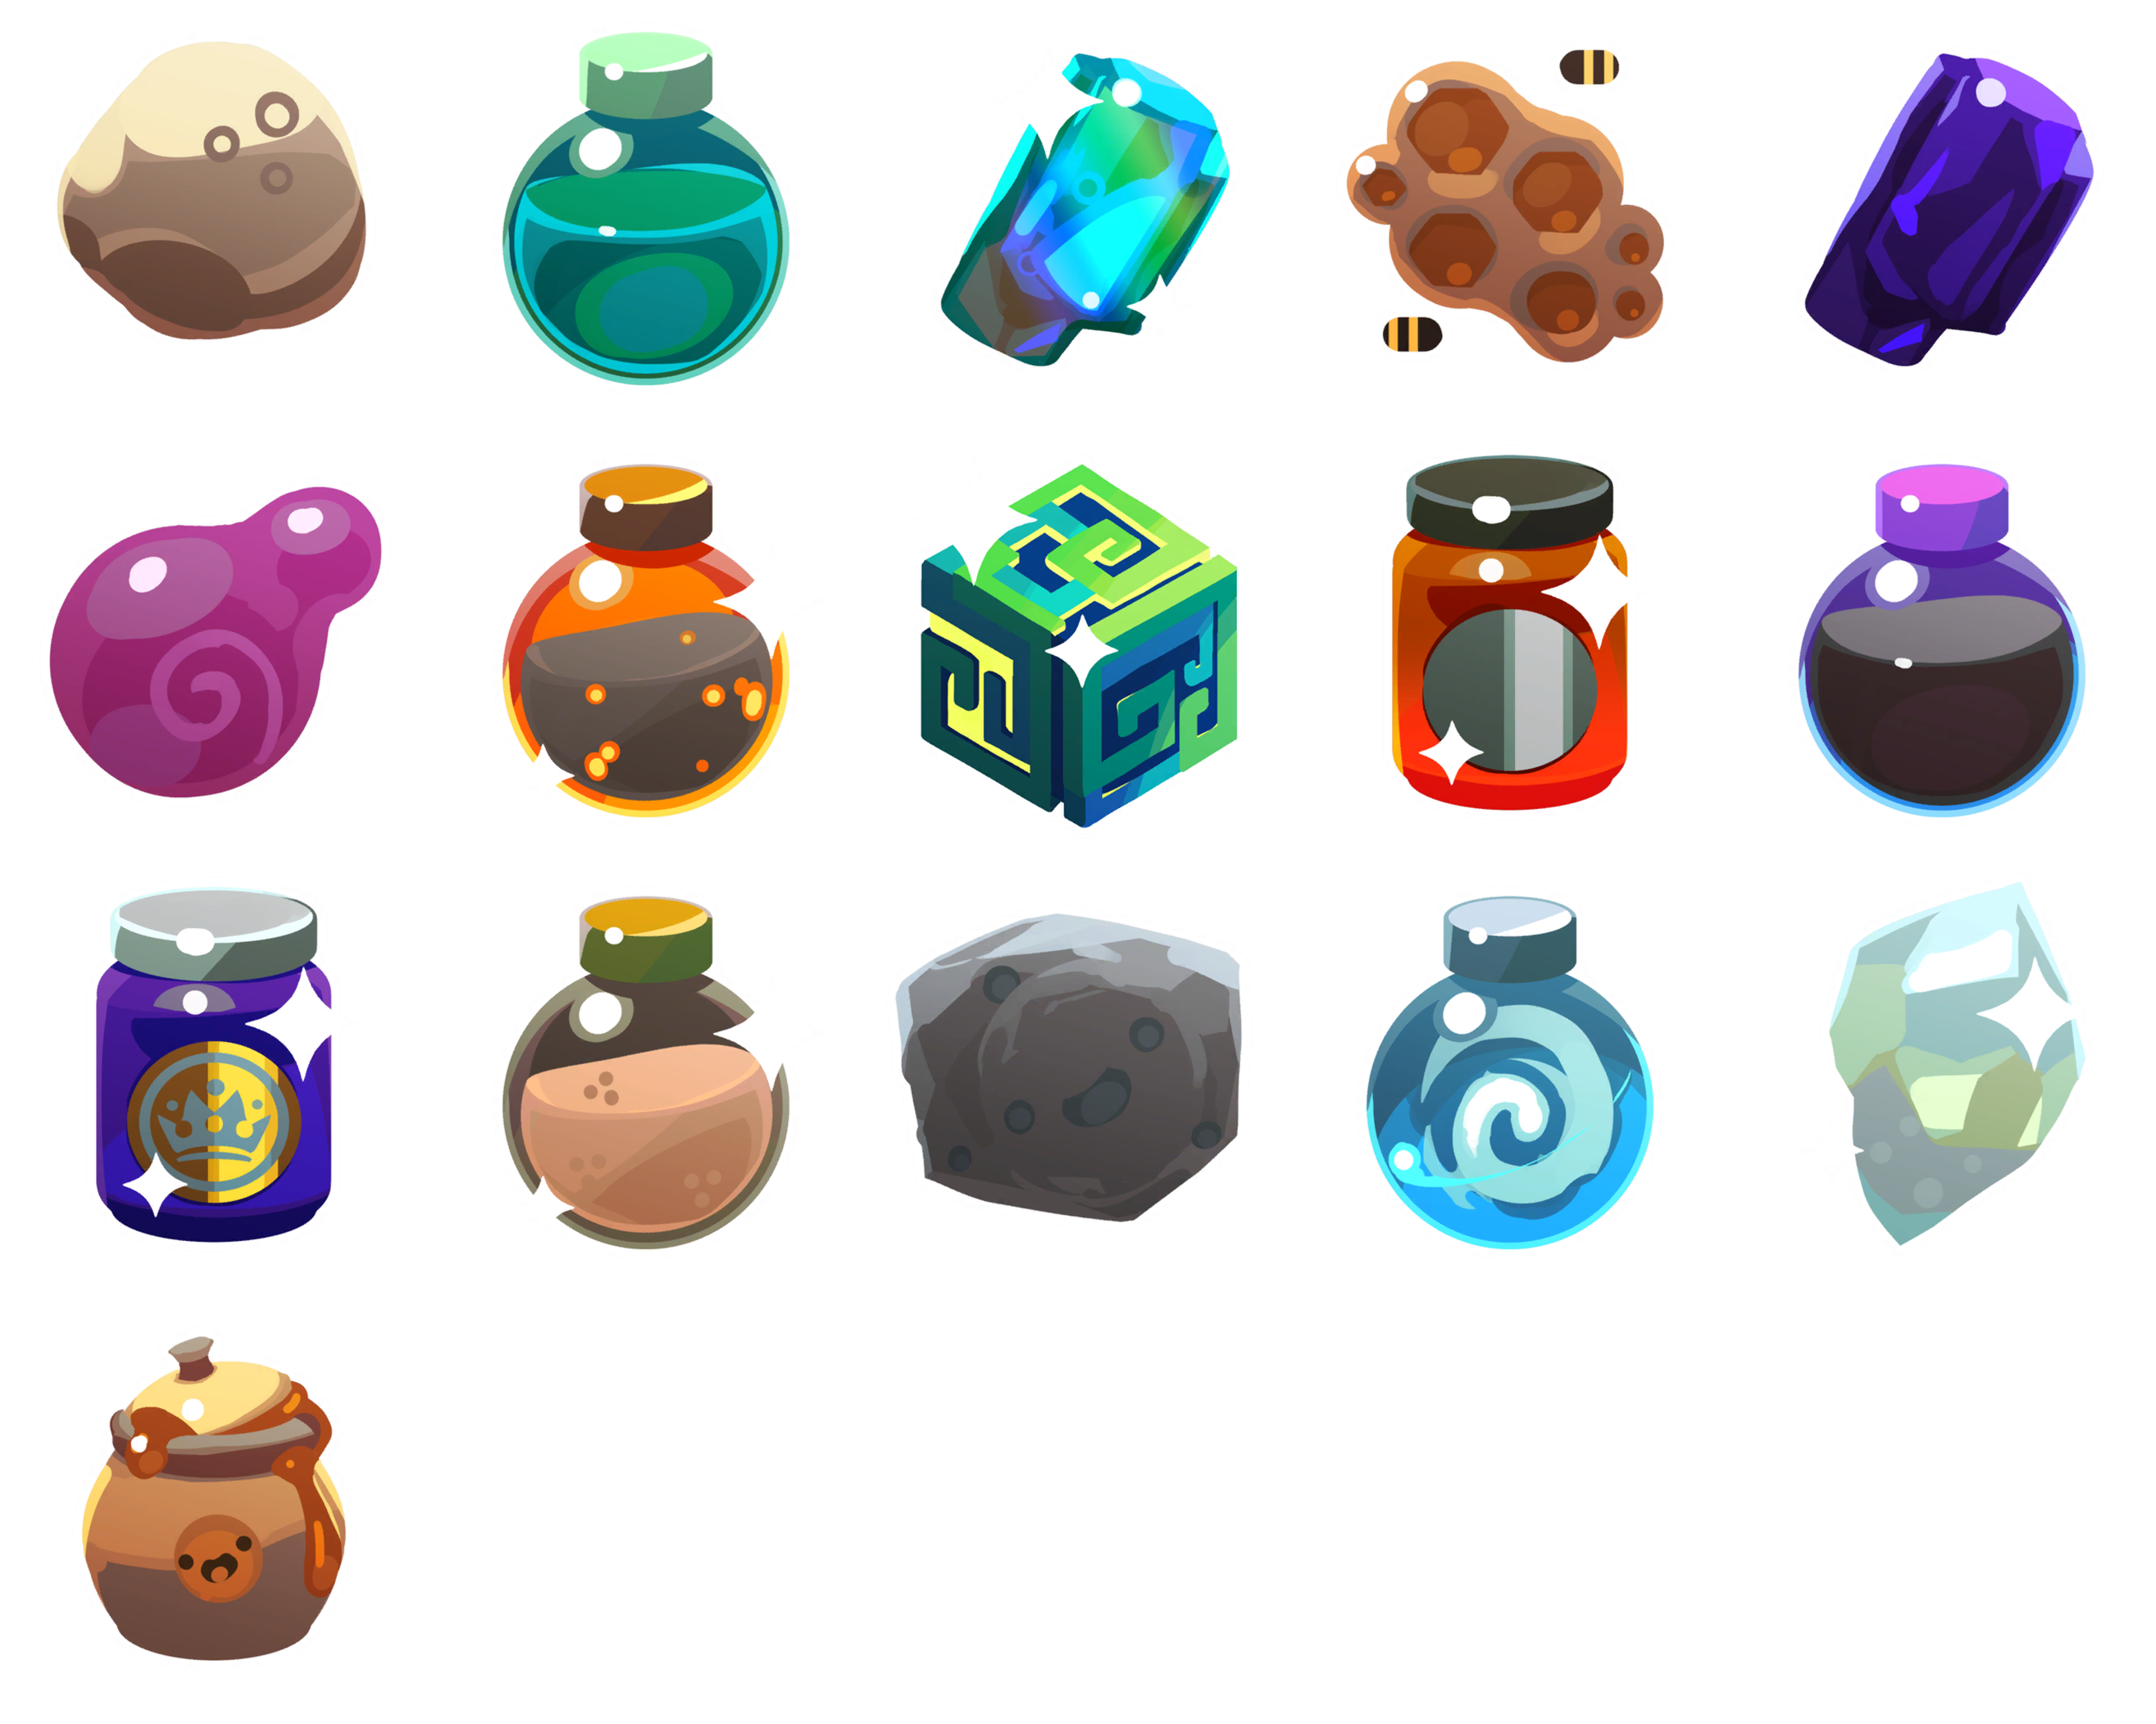 Slime Rancher - Crafting Icons